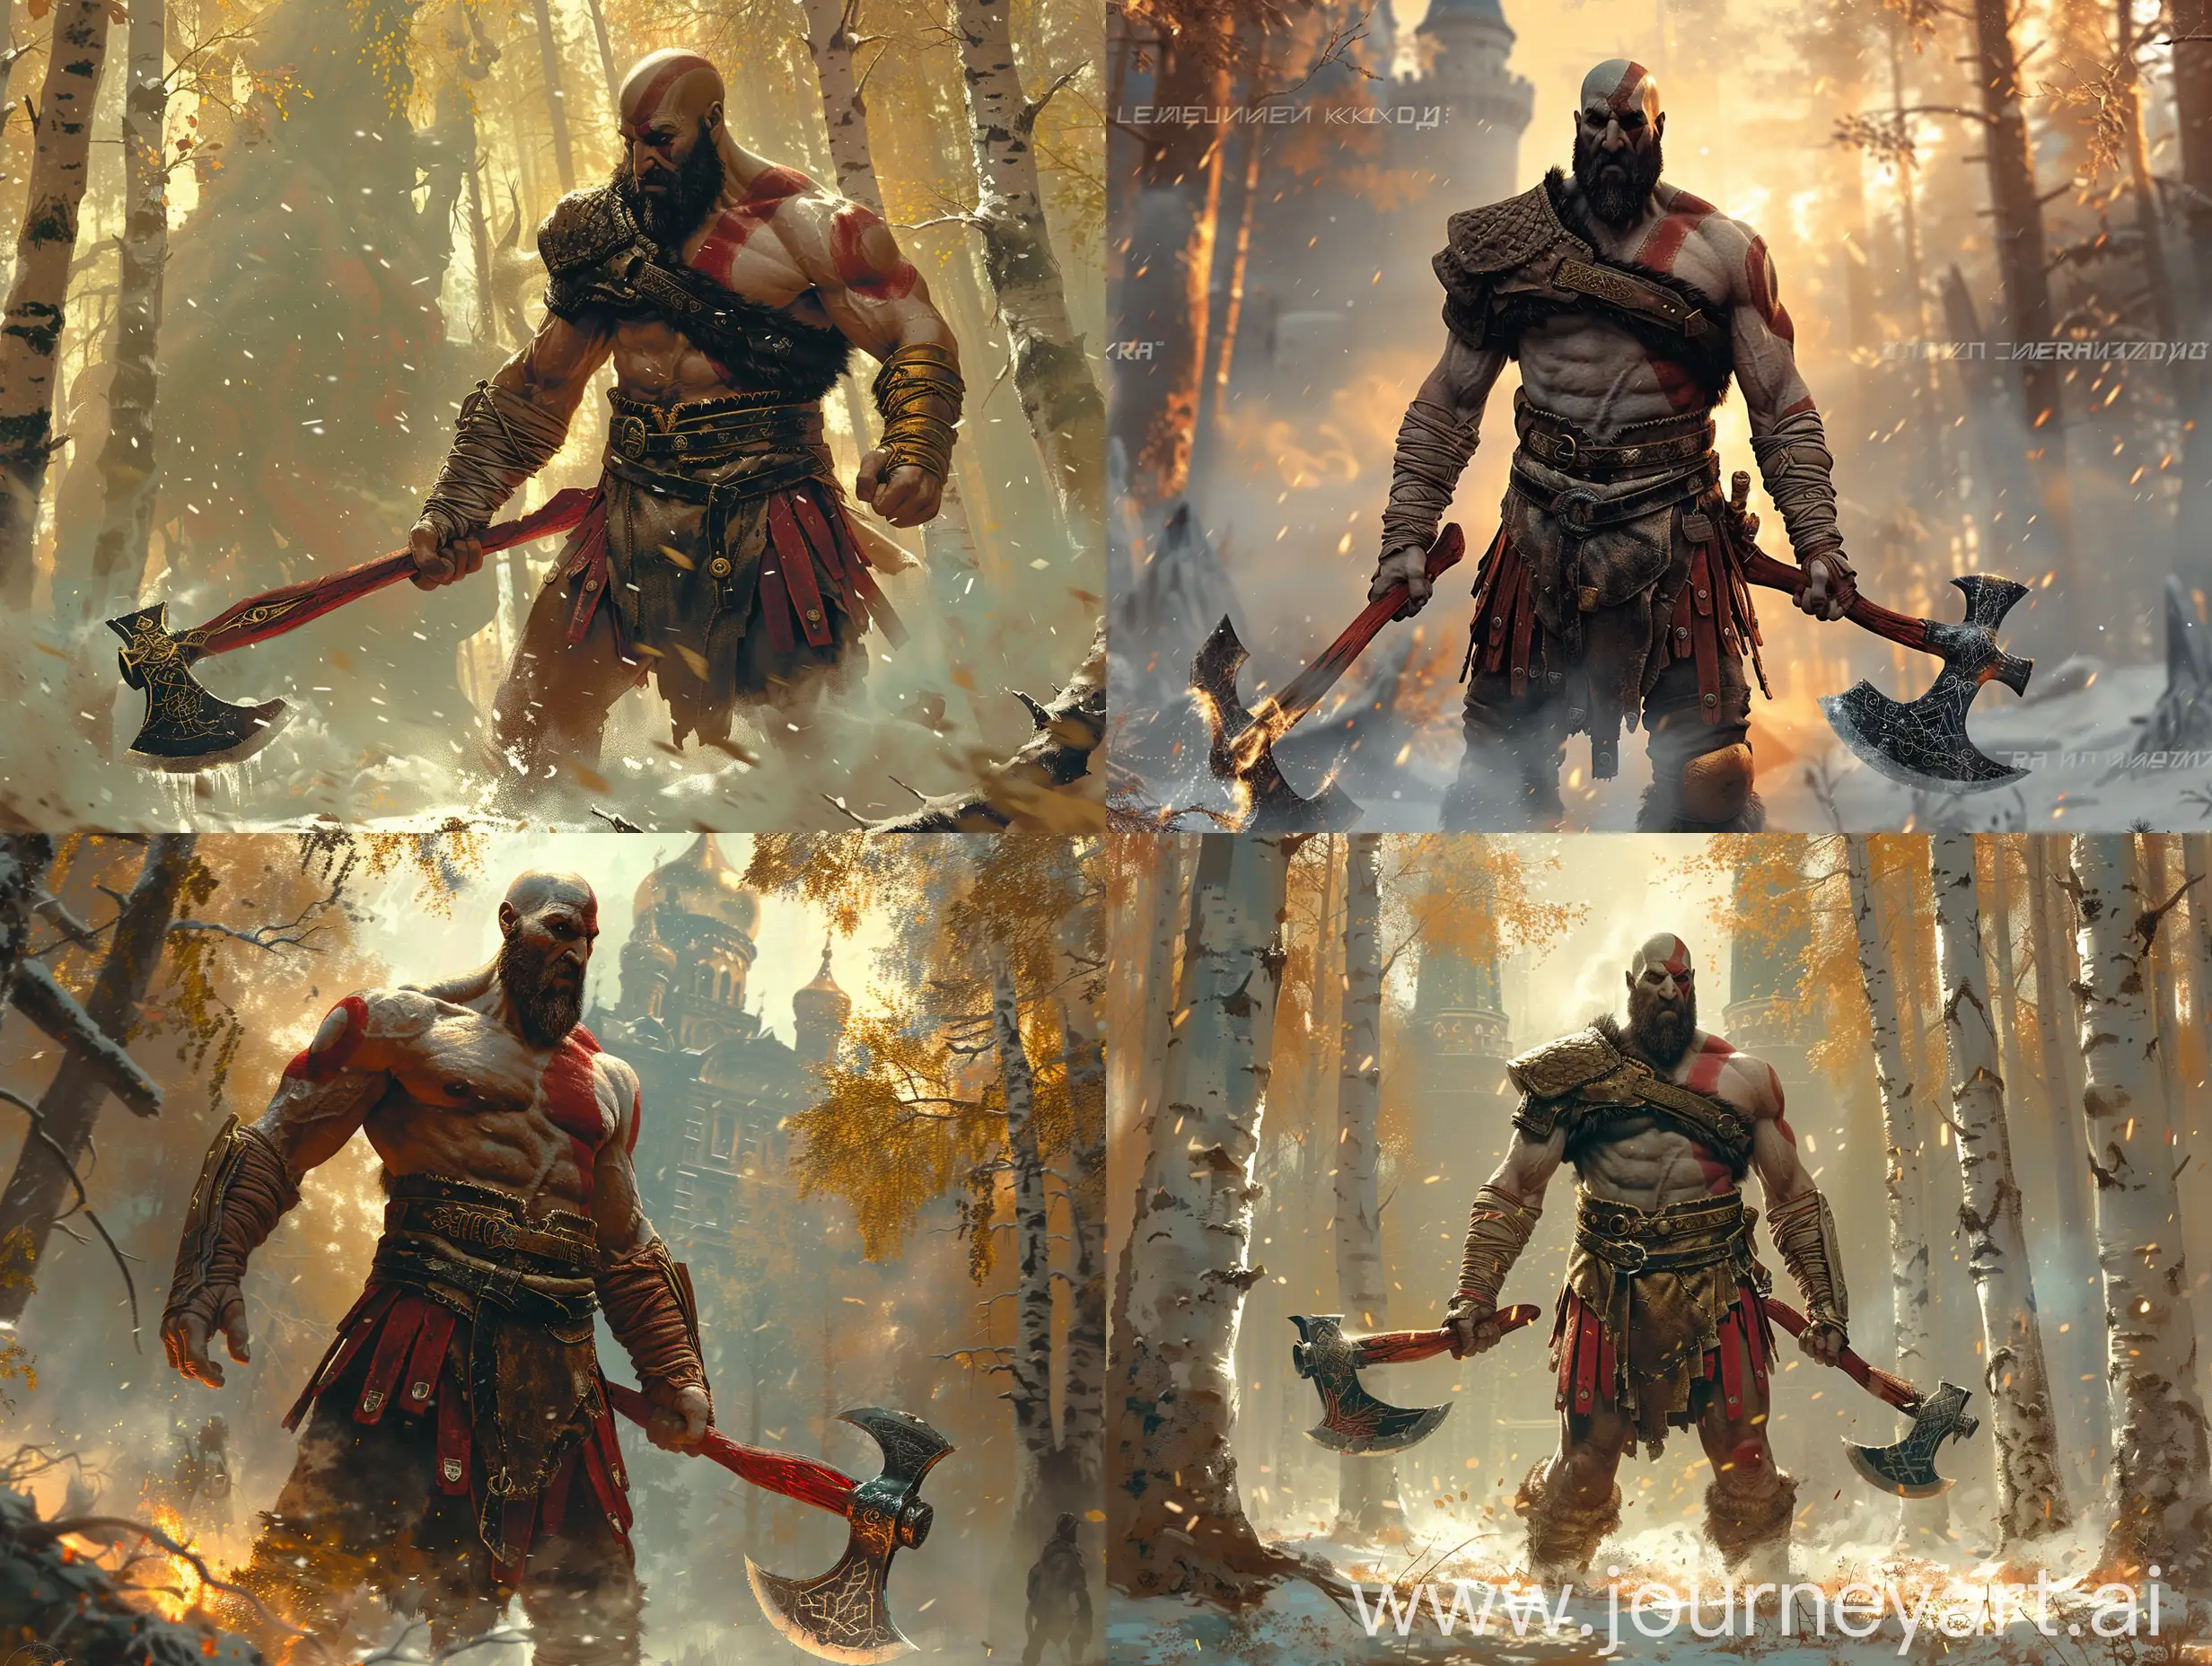 Kratos, the formidable Spartan warrior and God of War. Kratos stands imposingly amidst a dense Russian forest, wielding the Leviathan Axe in one hand and the Blades of Chaos in the other. His muscles ripple with strength as he prepares for battle. The Leviathan Axe is adorned with intricate Cyrillic runes, and the Blades of Chaos have been modified with traditional Russian motifs. Kratos is engaged in a fierce battle with a mythical Slavic creature, a massive three-headed Zmey Gorynych. Each head breathes a different element – fire, ice, and lightning – adding to the intensity of the confrontation. Kratos' stoic expression contrasts with the chaotic nature of the beast. The environment is enveloped in an ethereal mist, with ancient Russian birch trees shrouded in mystic fog. The forest floor is covered in snow, and the air crackles with the energy of the impending clash. The Leviathan Axe leaves a trail of frost in its wake, and the Blades of Chaos emit sparks of fiery rage. The overall style is a fusion of Spartan and Russian aesthetics, blending the iconic red color of Kratos' war paint with the rich, earthy tones of traditional Russian folklore. The atmosphere is charged with an otherworldly energy, combining the gritty intensity of Kratos' world with the mythical ambiance of Russian folklore. In the background, the silhouette of a majestic Russian castle looms, further emphasizing the clash between ancient gods and mythical creatures. The scene is bathed in a warm, golden glow, casting long shadows and highlighting the raw power and determination of Kratos in this uniquely Russian-inspired encounter ‐‐q . 25 --stylize 500 